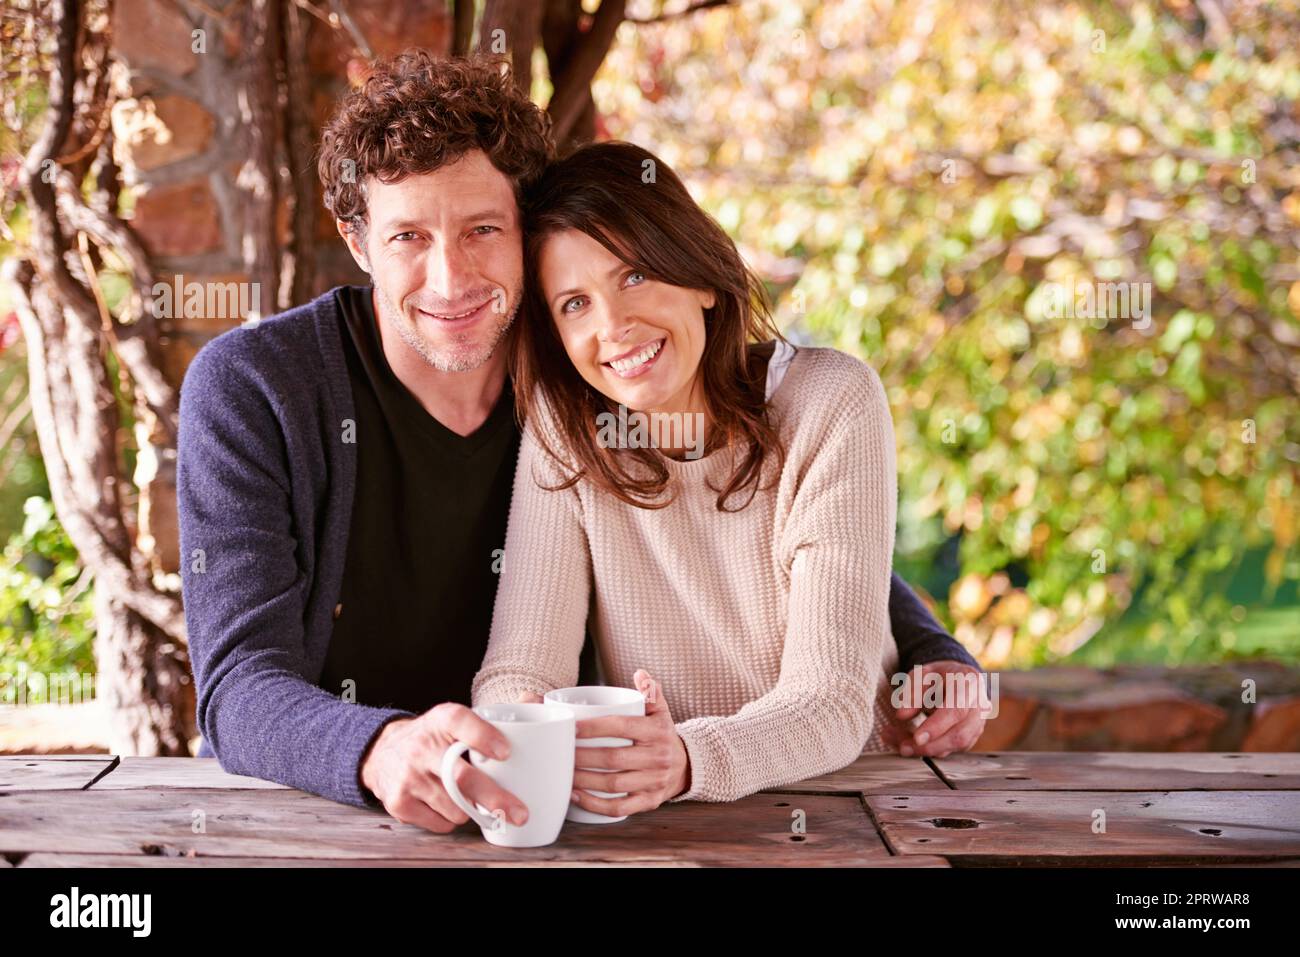 Tea-time tenderness. Portrait of a mature couple embracing in the outdoors. Stock Photo